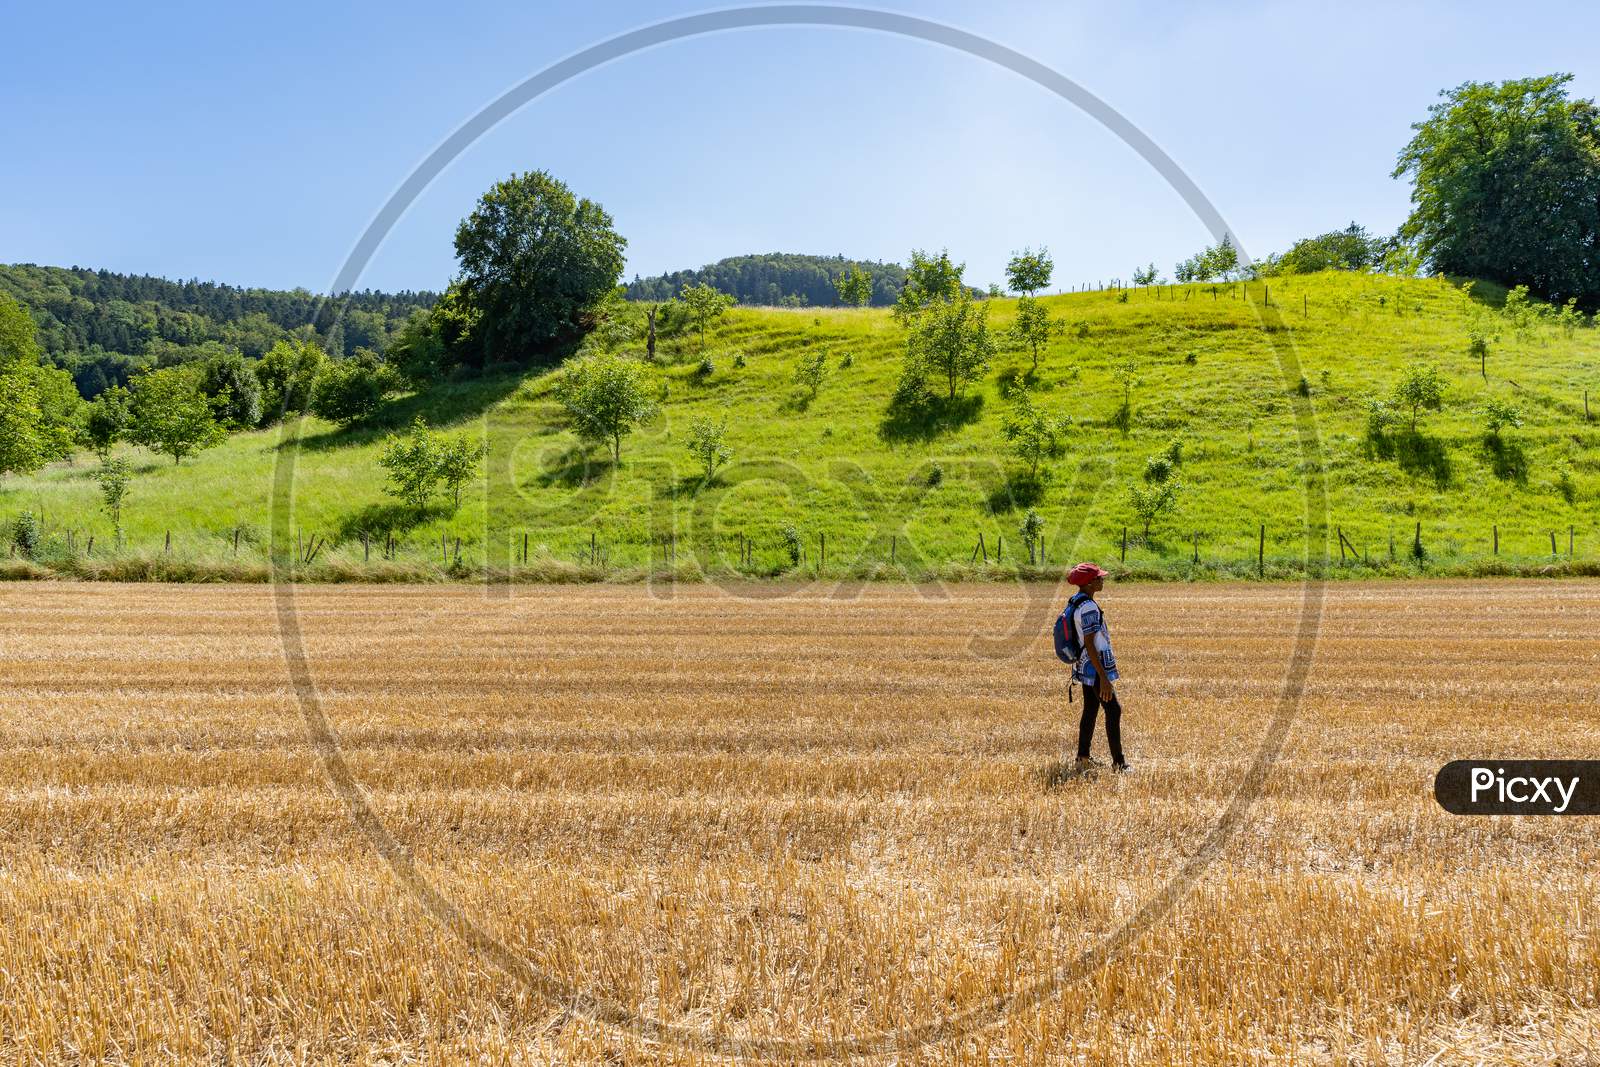 African Woman Walking On Golden Harvested Corn Field In Hot Summer Afternoon.